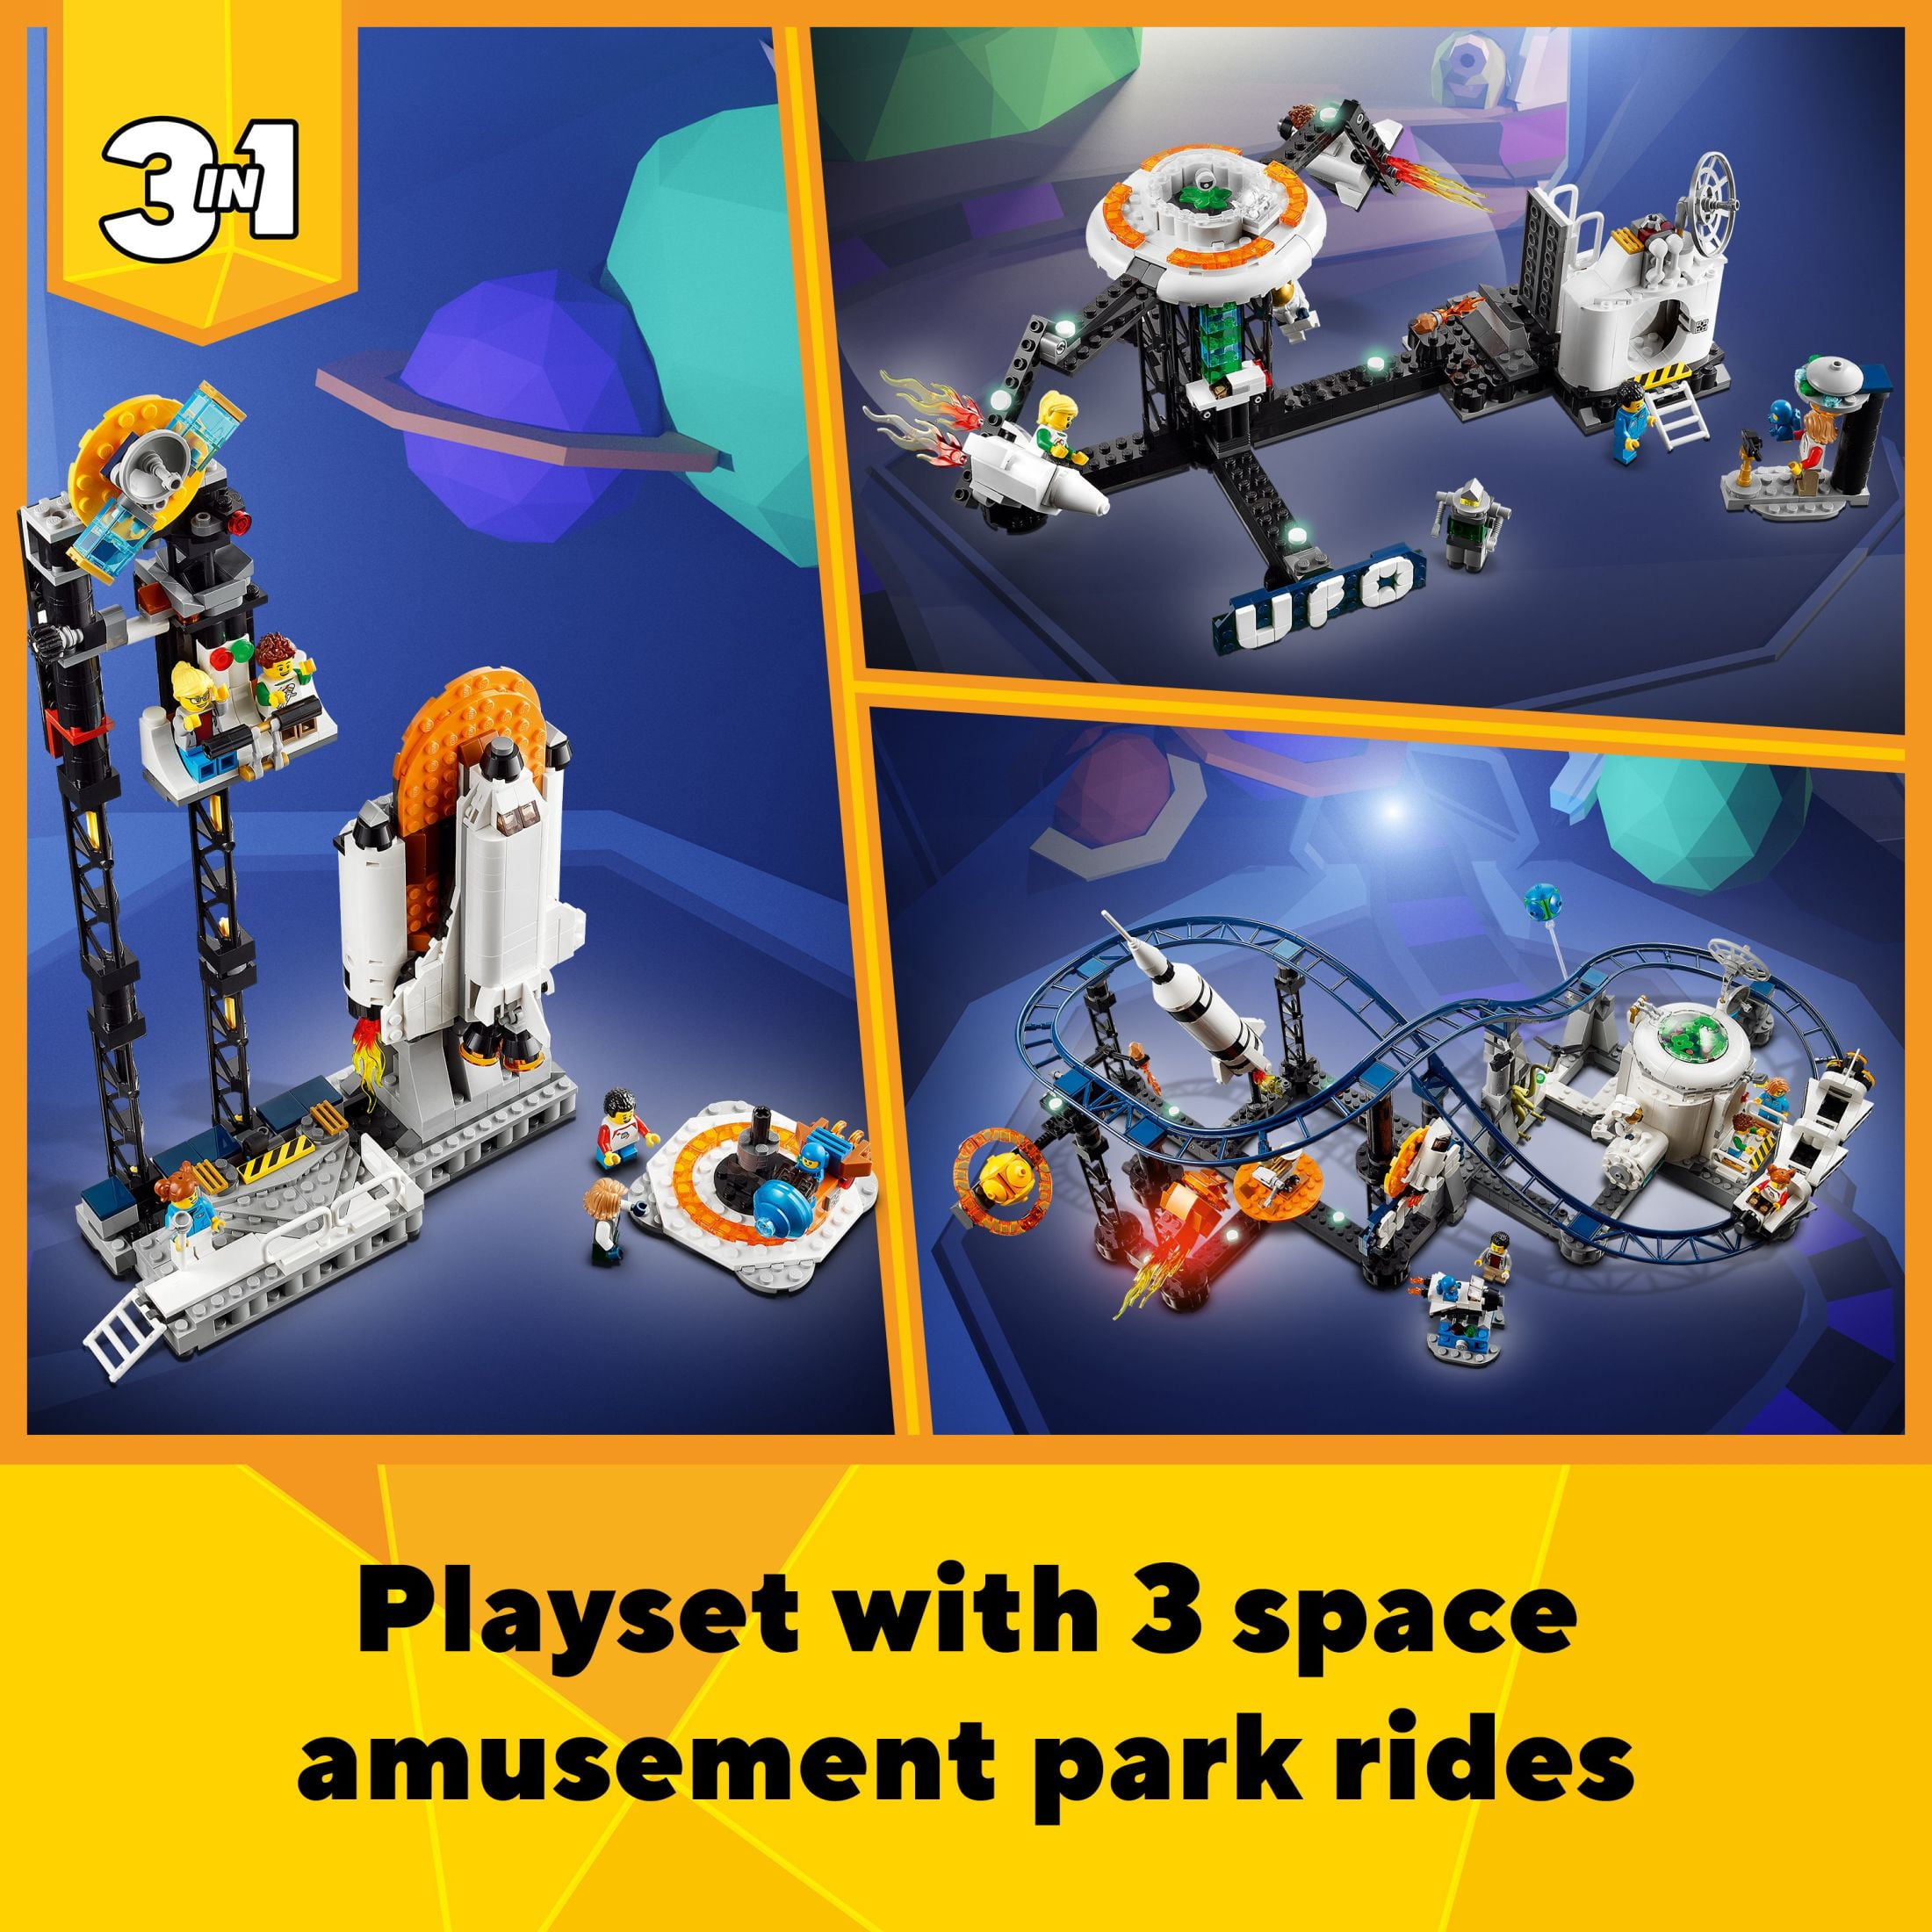 LEGO Creator 3 in 1 Space Roller Coaster, Rebuildable Amusement Park, Build  as a Winding Roller Coaster or Drop Tower or Spinning Carousel, with 5  Minifigures, Building Toy Set for Kids Ages 9+, 31142 